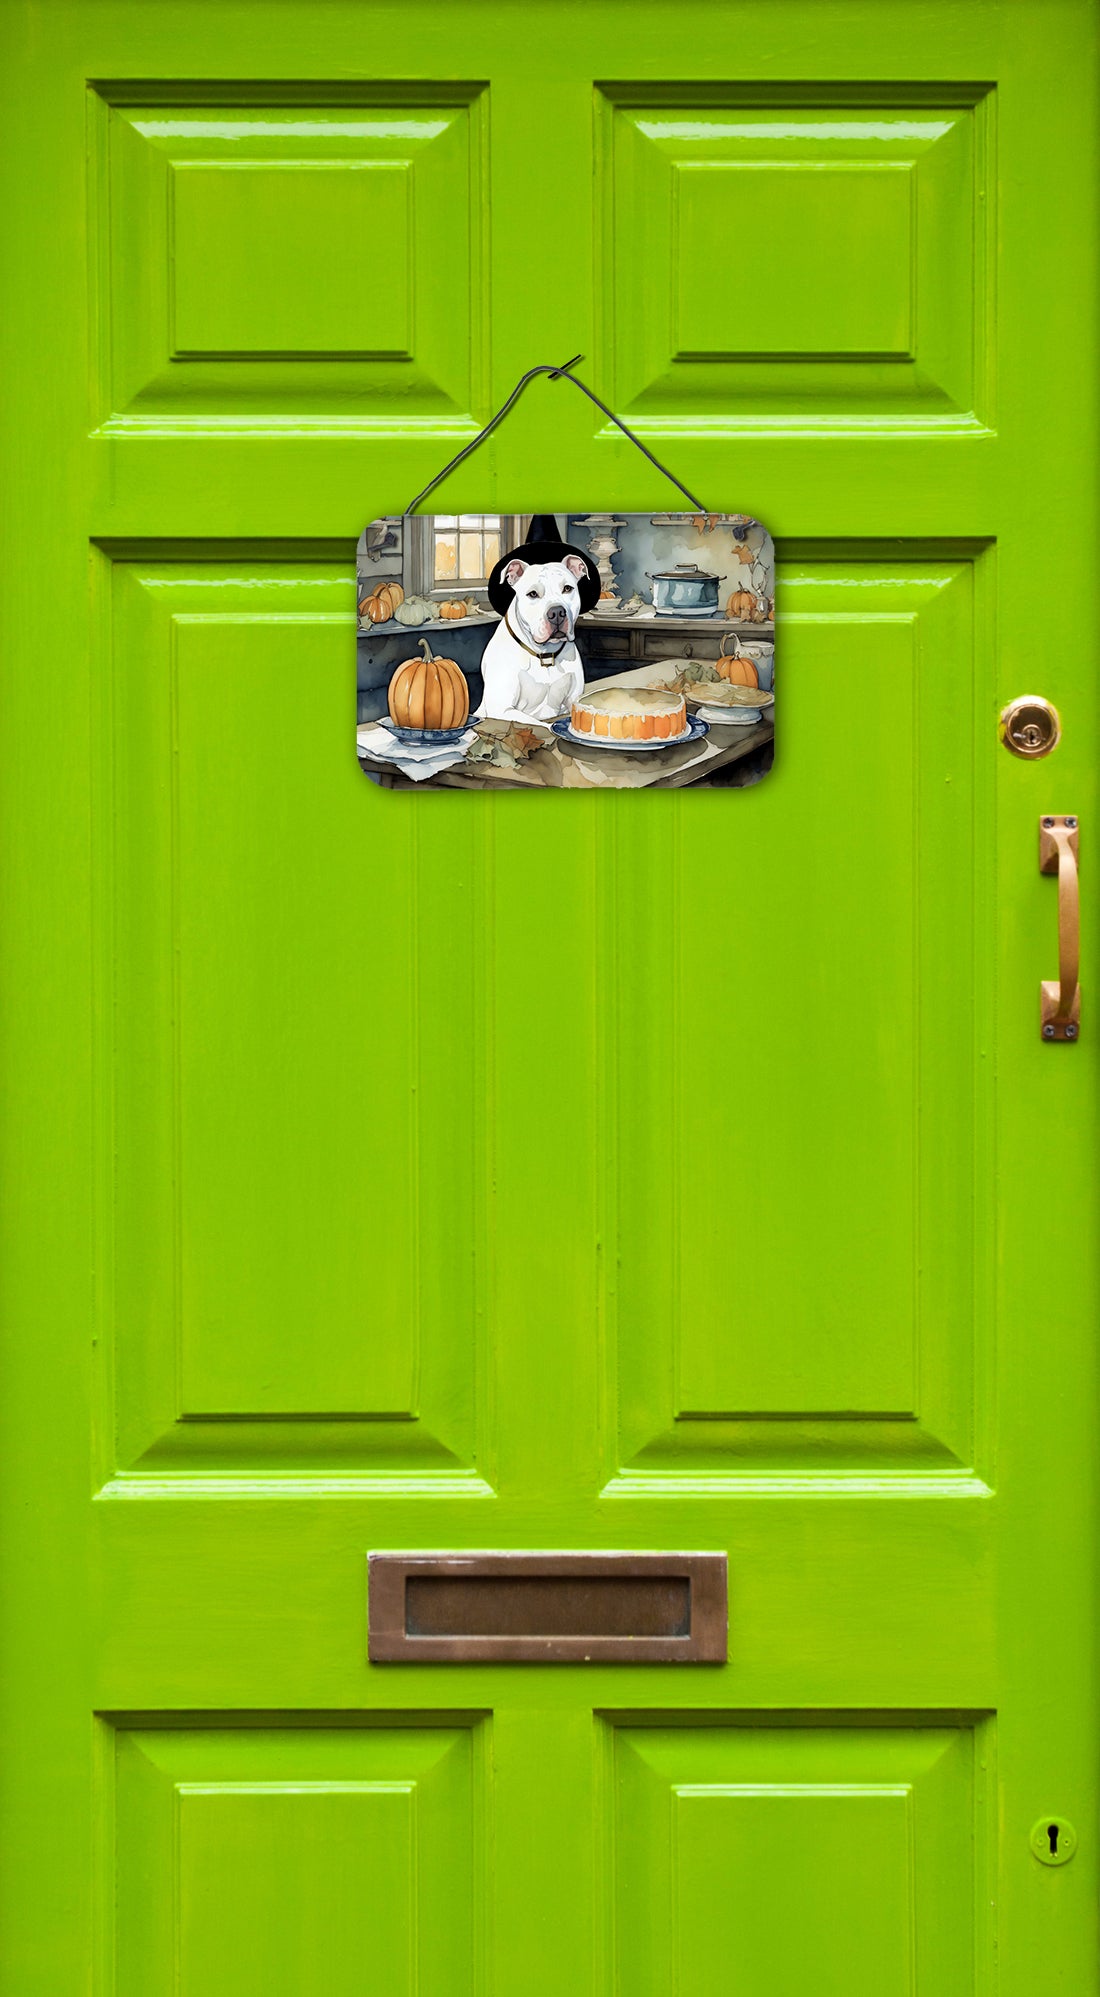 Buy this Pit Bull Terrier Fall Kitchen Pumpkins Wall or Door Hanging Prints